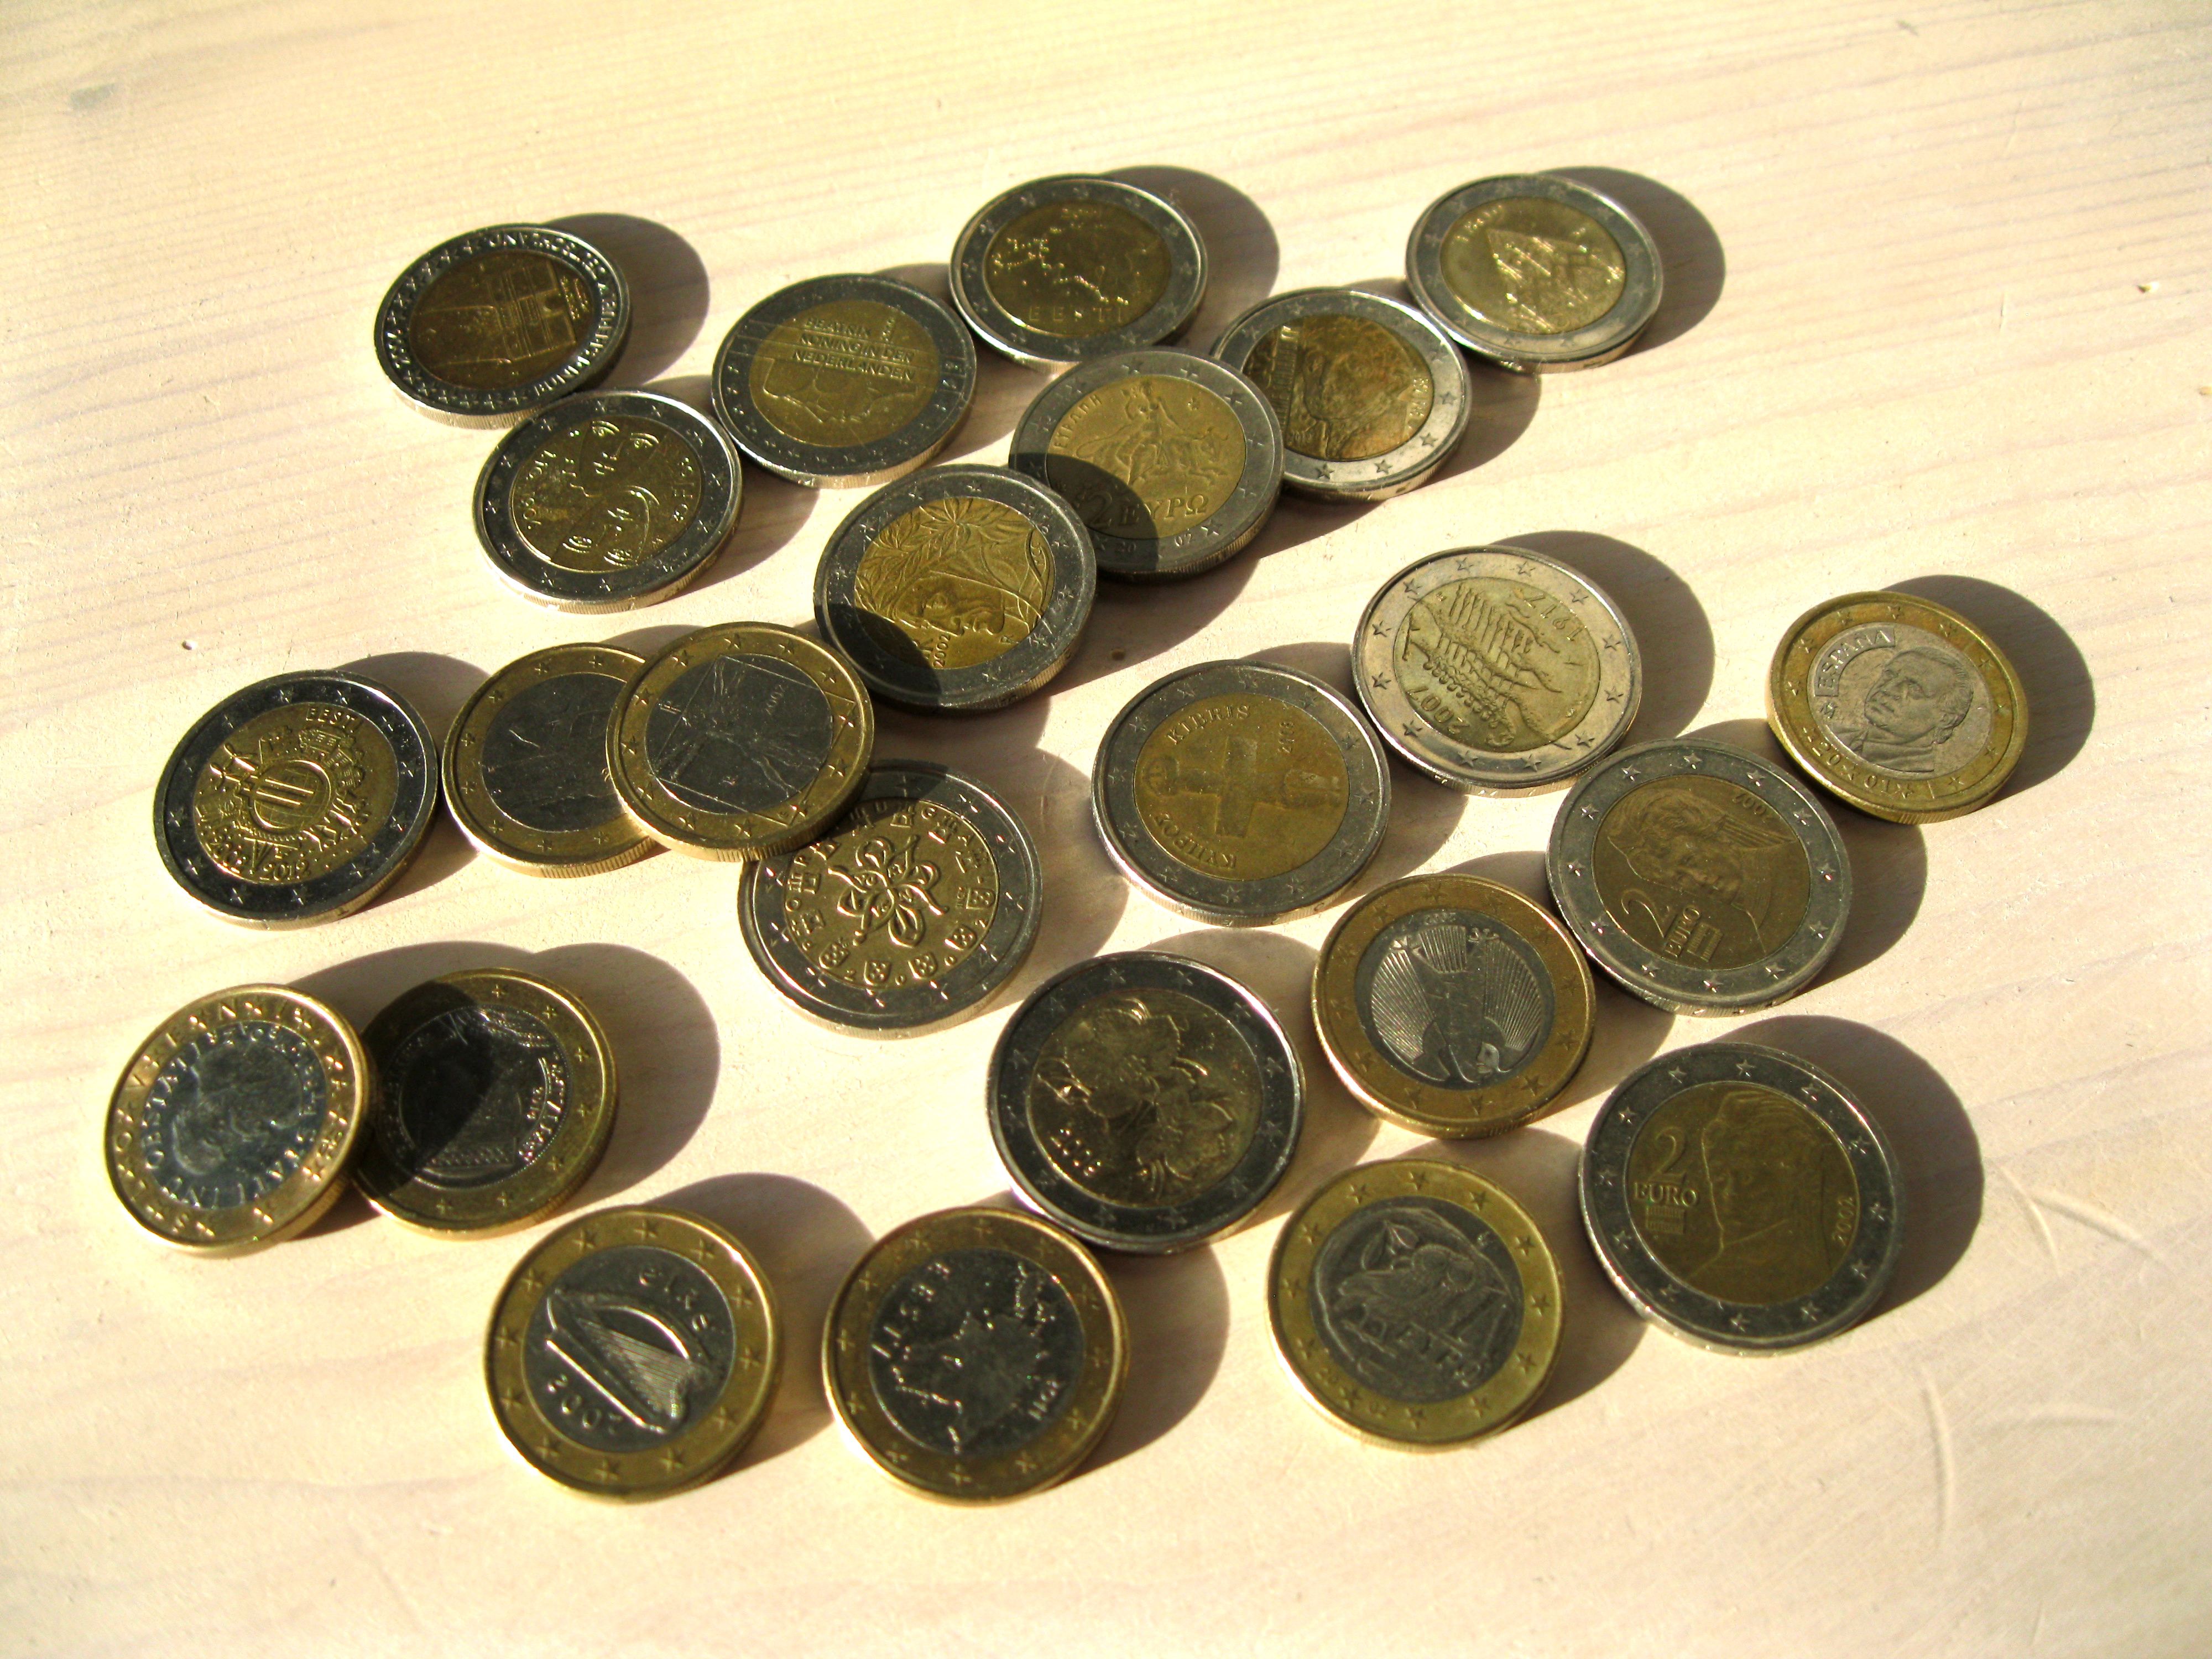 File:Different 1€ and 2€ euro coins.jpg - Wikimedia Commons